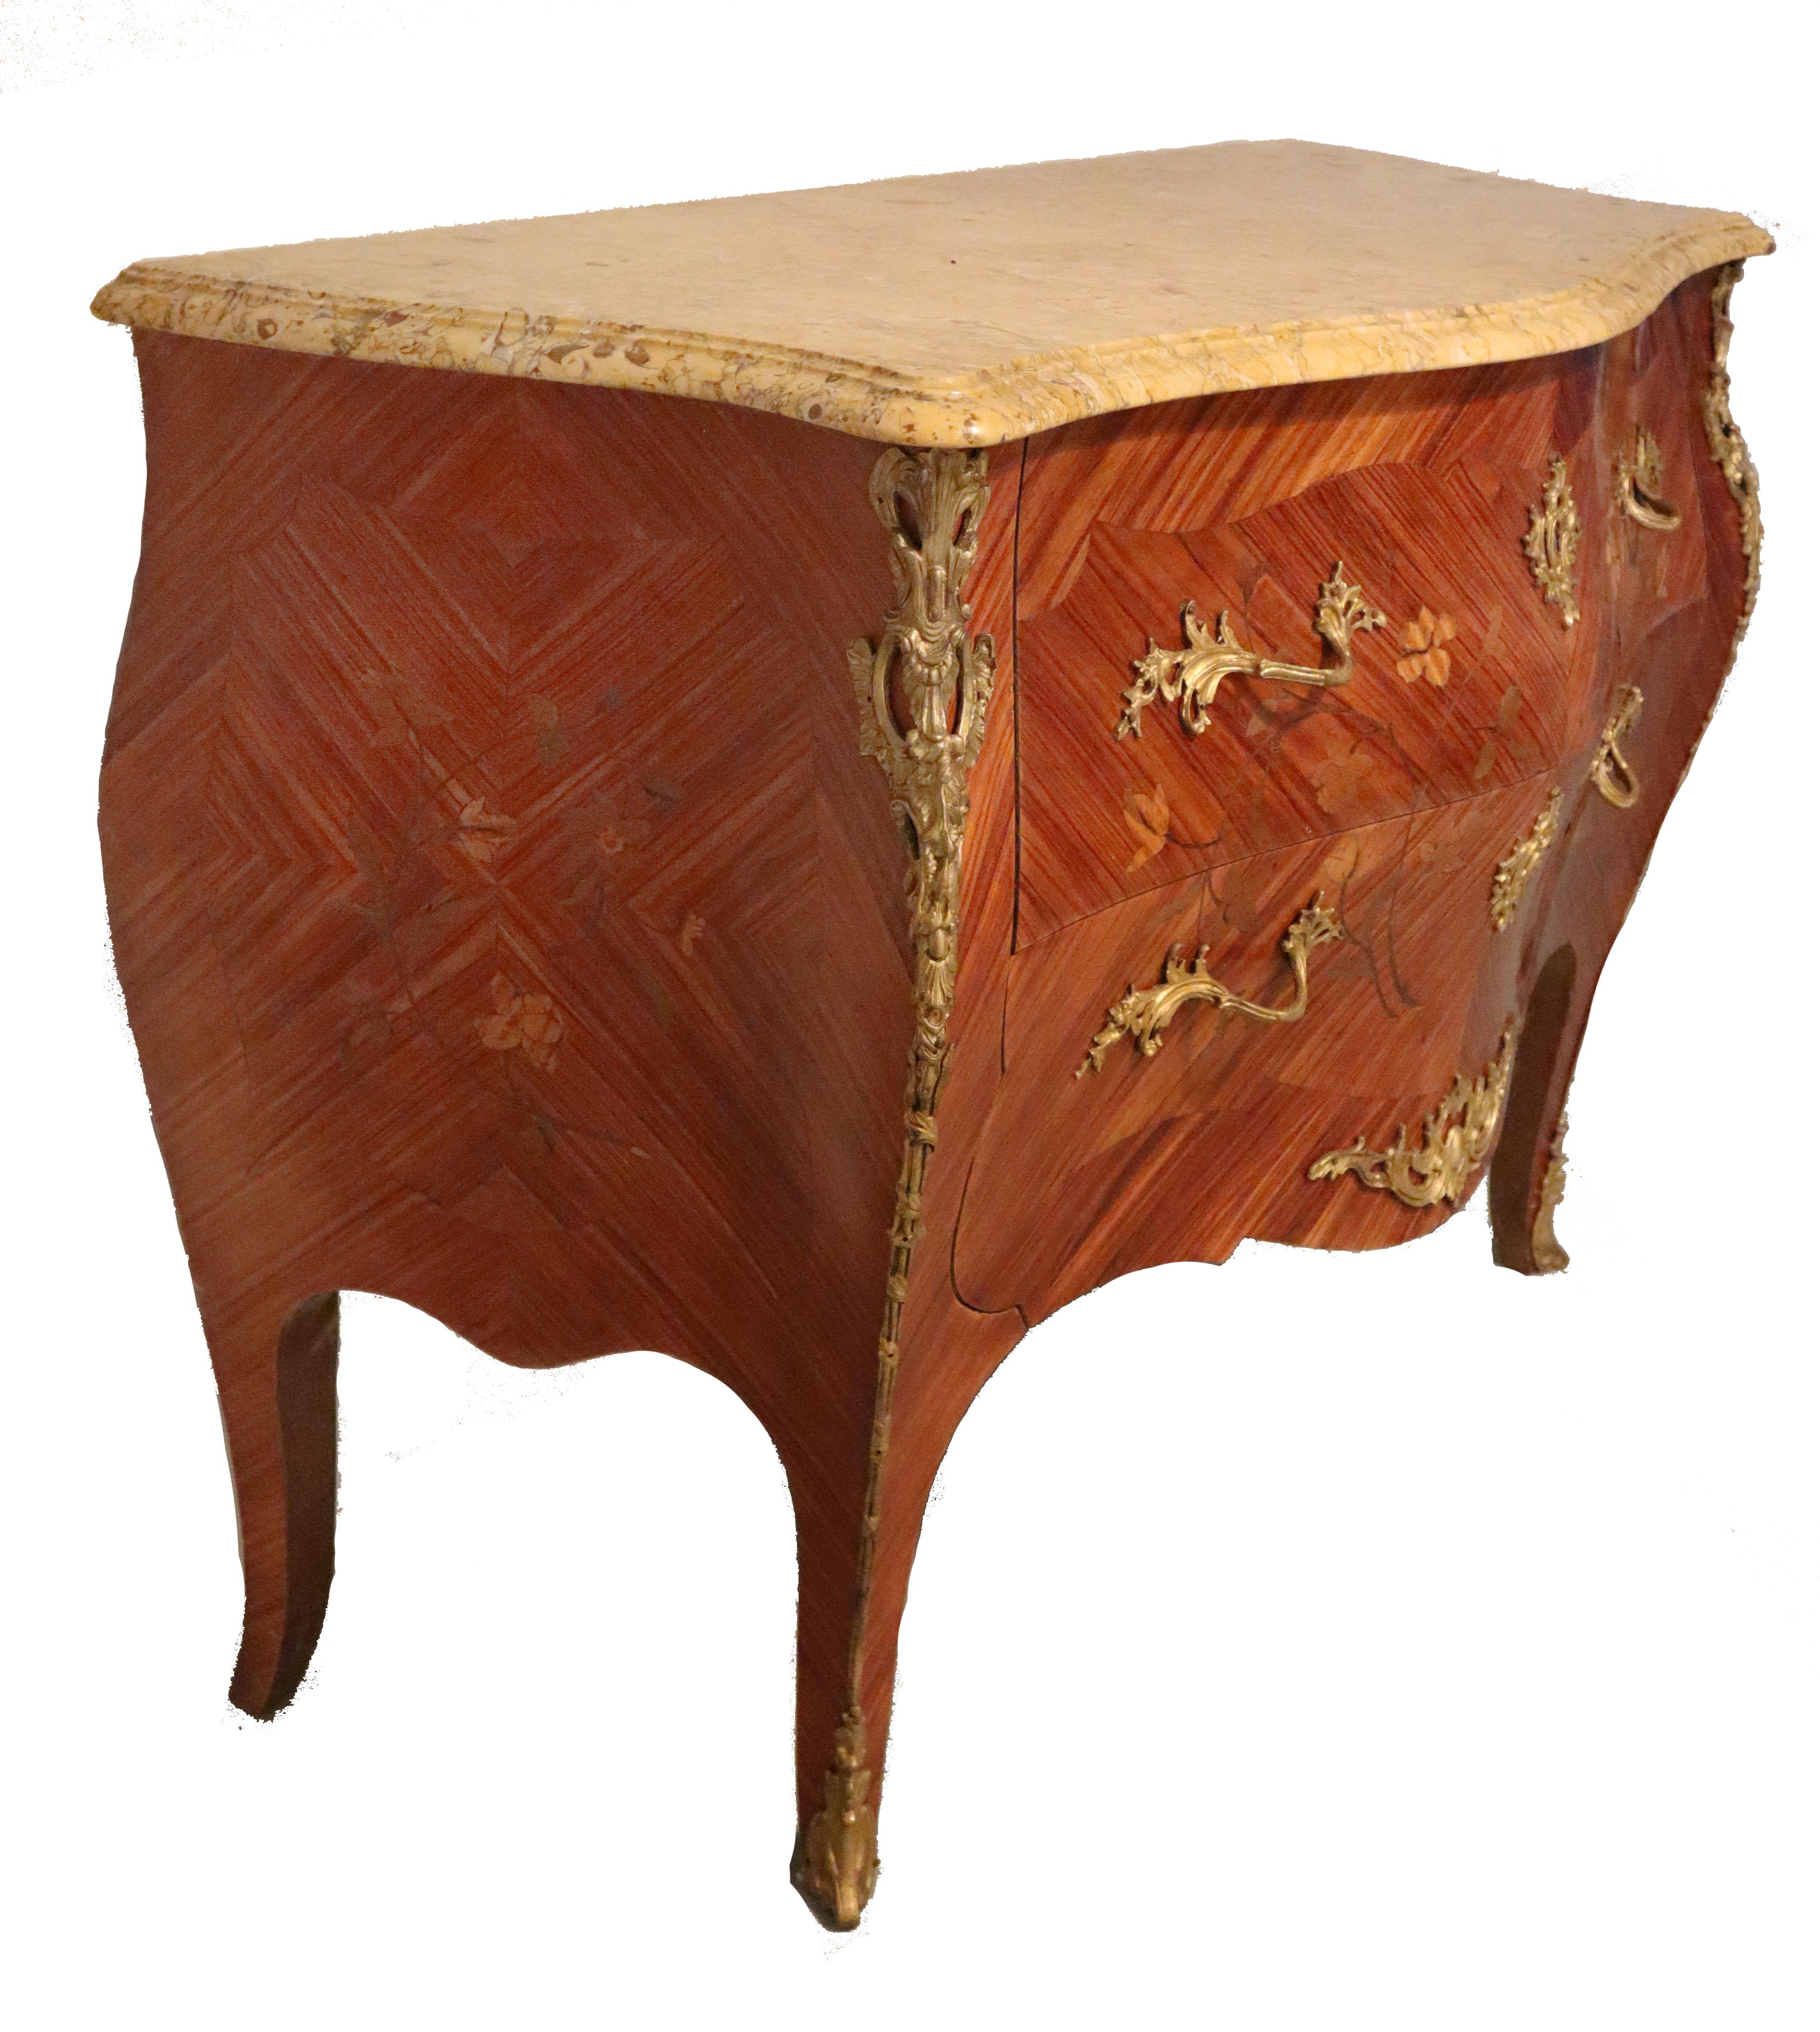 19th century French Louis XV bombe marble-top commode features exotic imported woods crafted in an exceedingly complex bombe shape, then adorned with lavish marquetry inlay, exquisite cast bronze ormolu mounts, and of course, a luxuriously veined